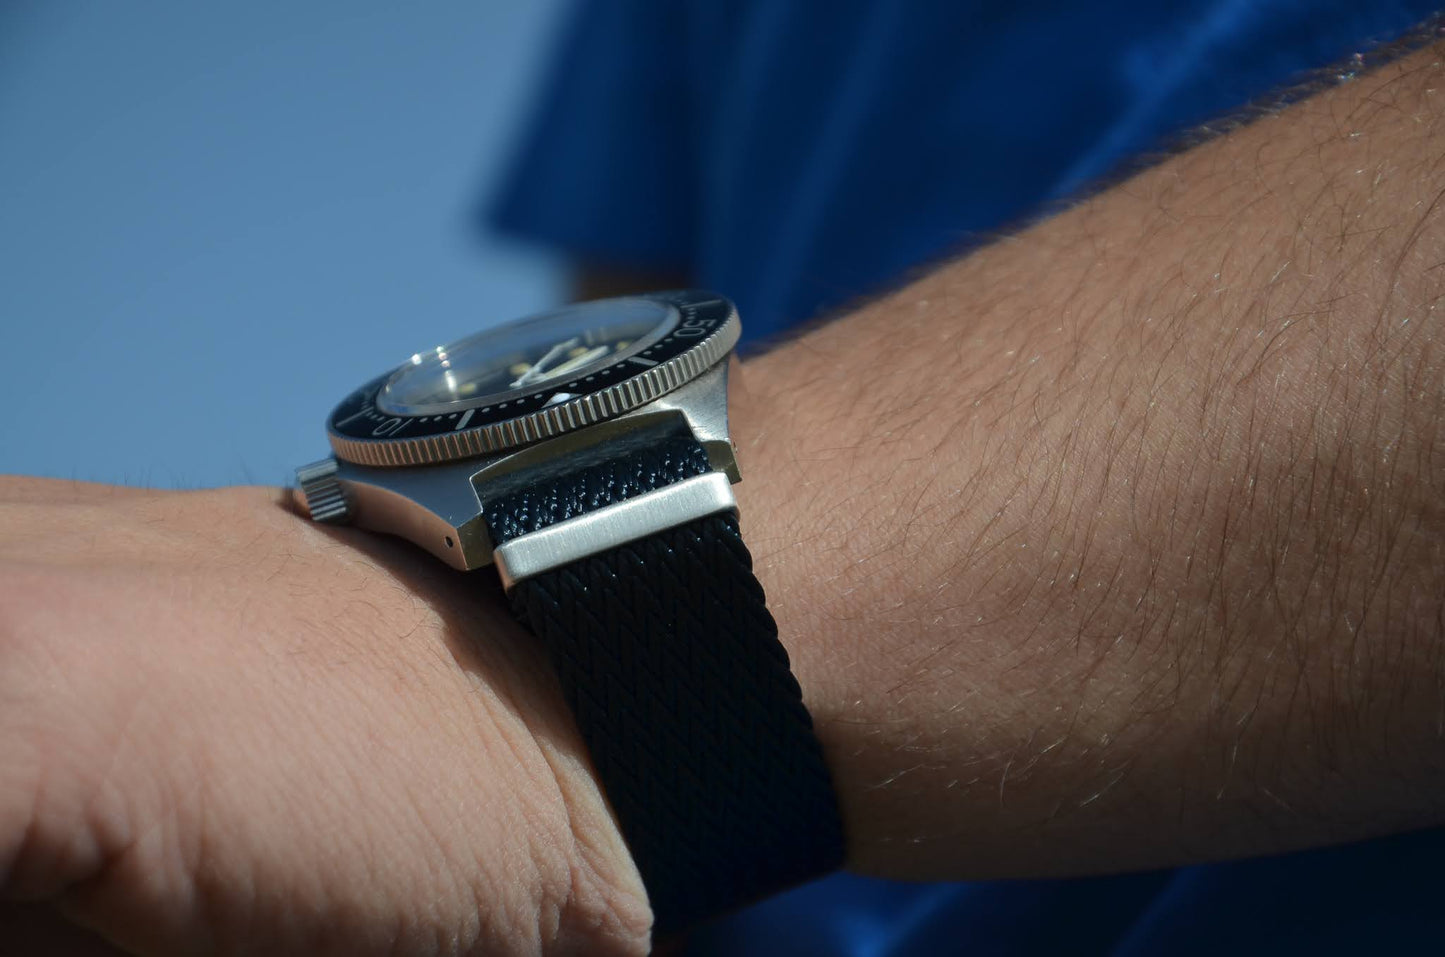 The 'Alexander' - Blue Herringbone patterned military watch strap made of a soft nylon